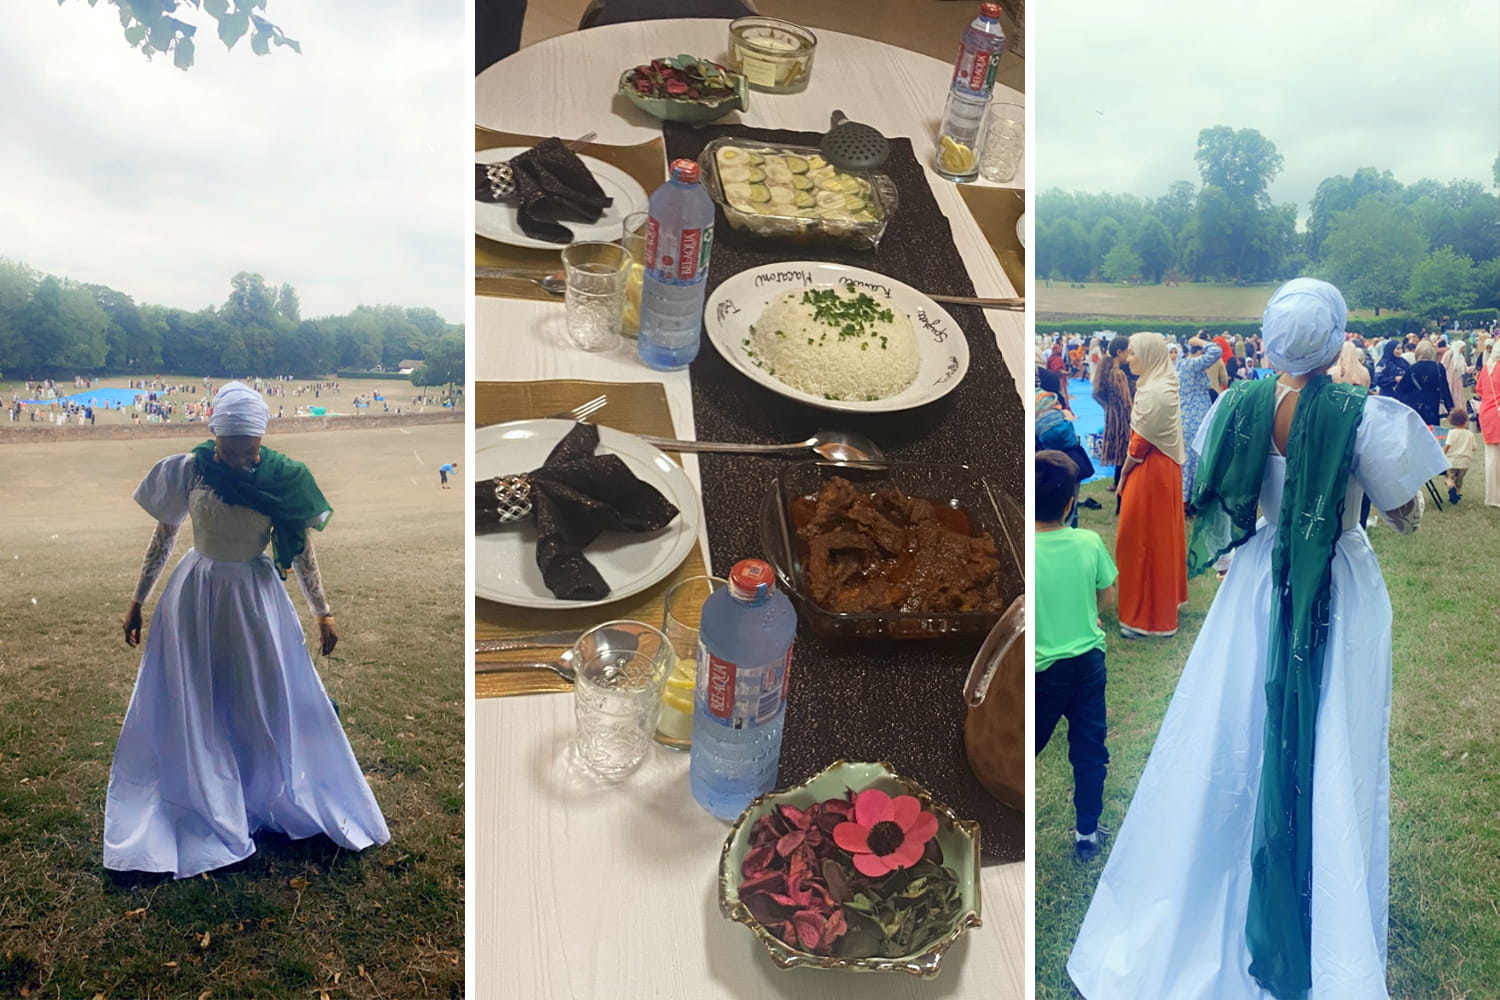 A collage showing Raihana Mohammed wearing a dress among a crowd in Castle Park; and food, drinks, and flowers on a beautifully laid table.